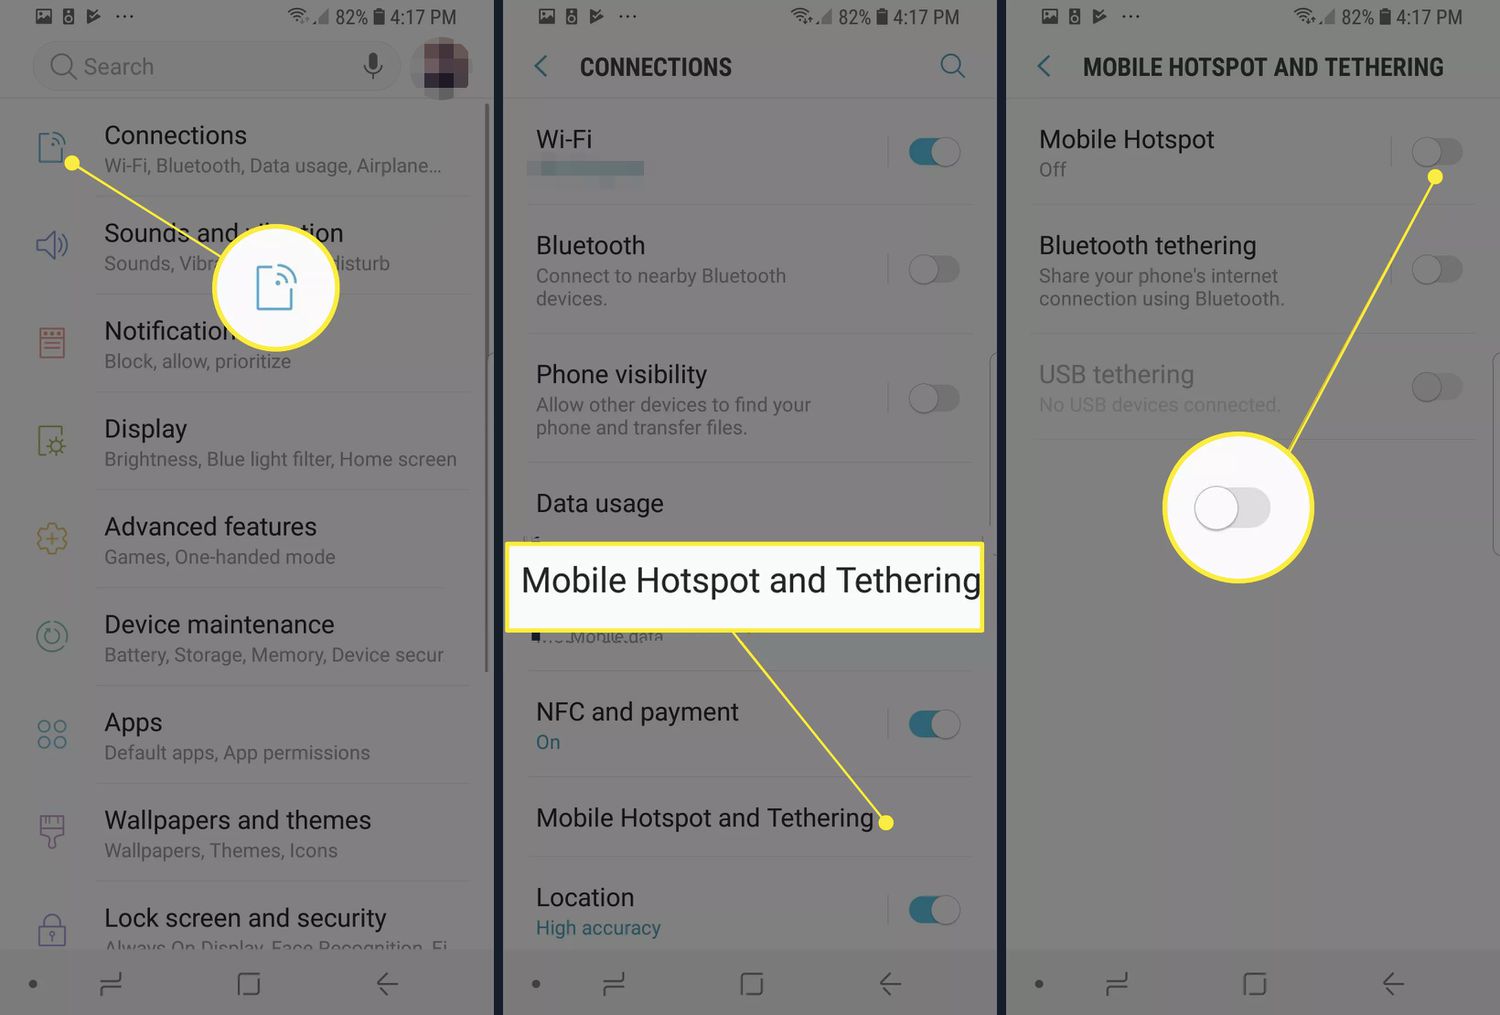 How to enable WiFi hotspot on Android